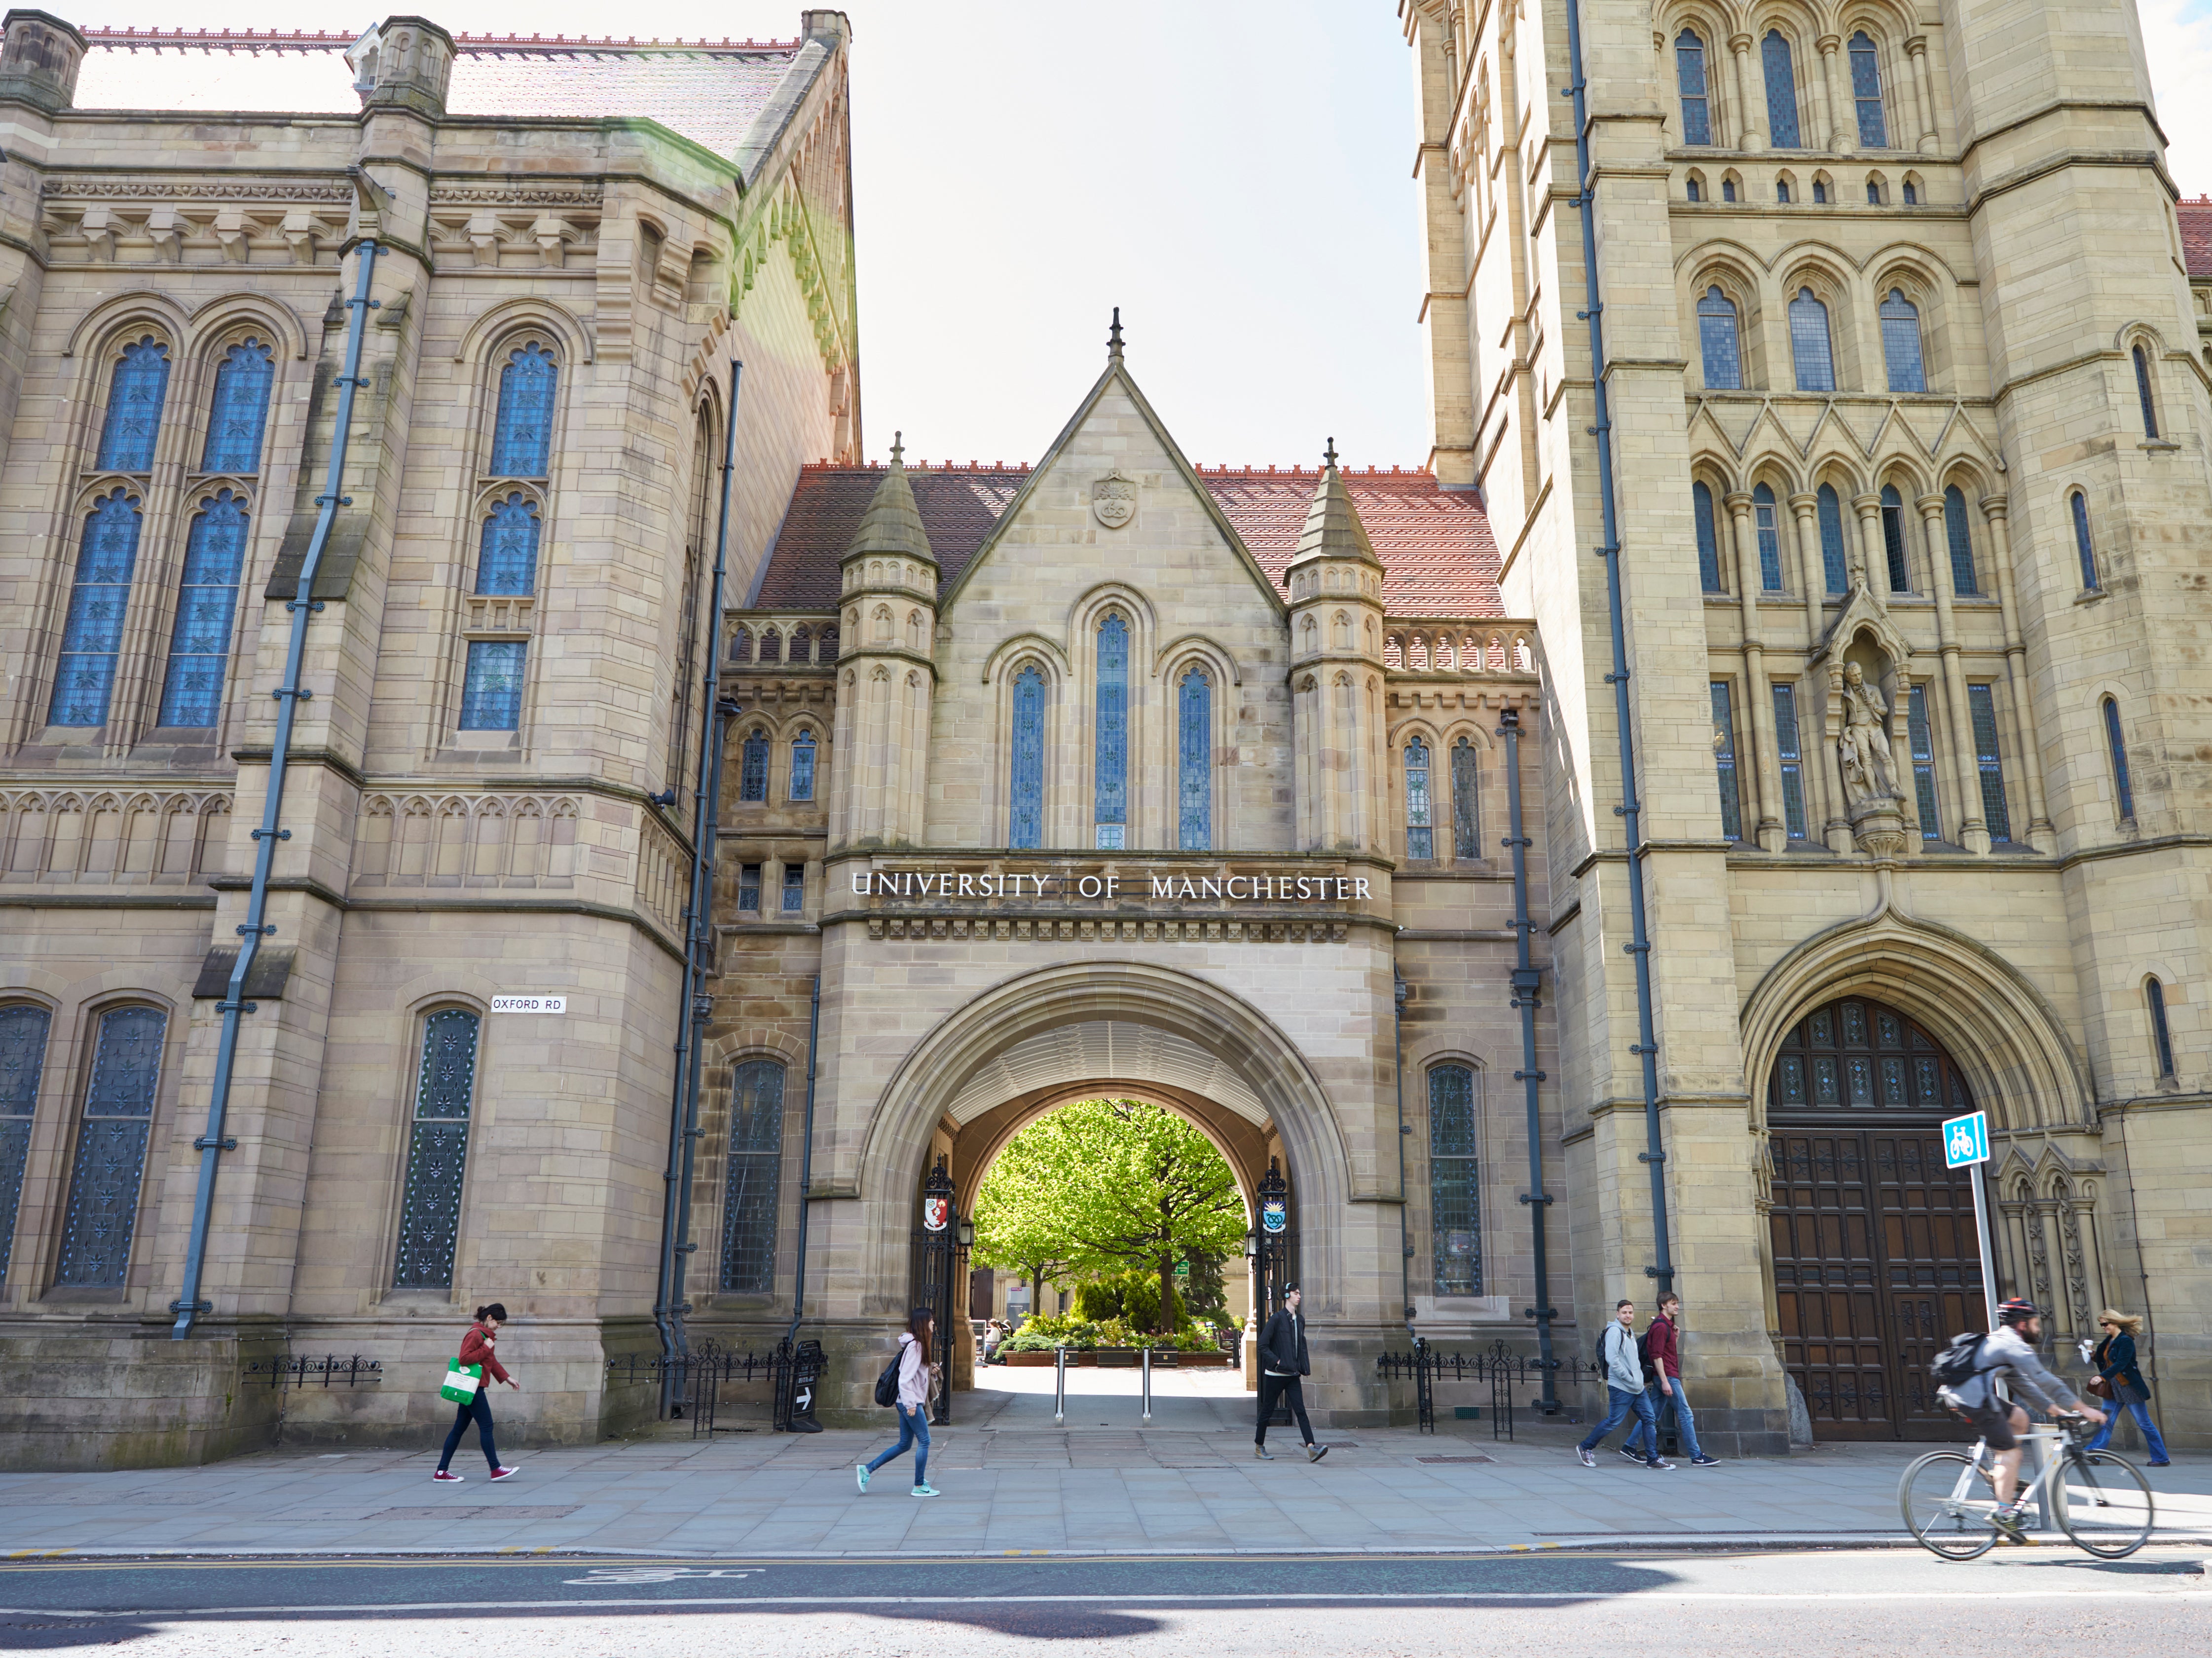 Students at the University of Manchester say police have been going into accomodation blocks